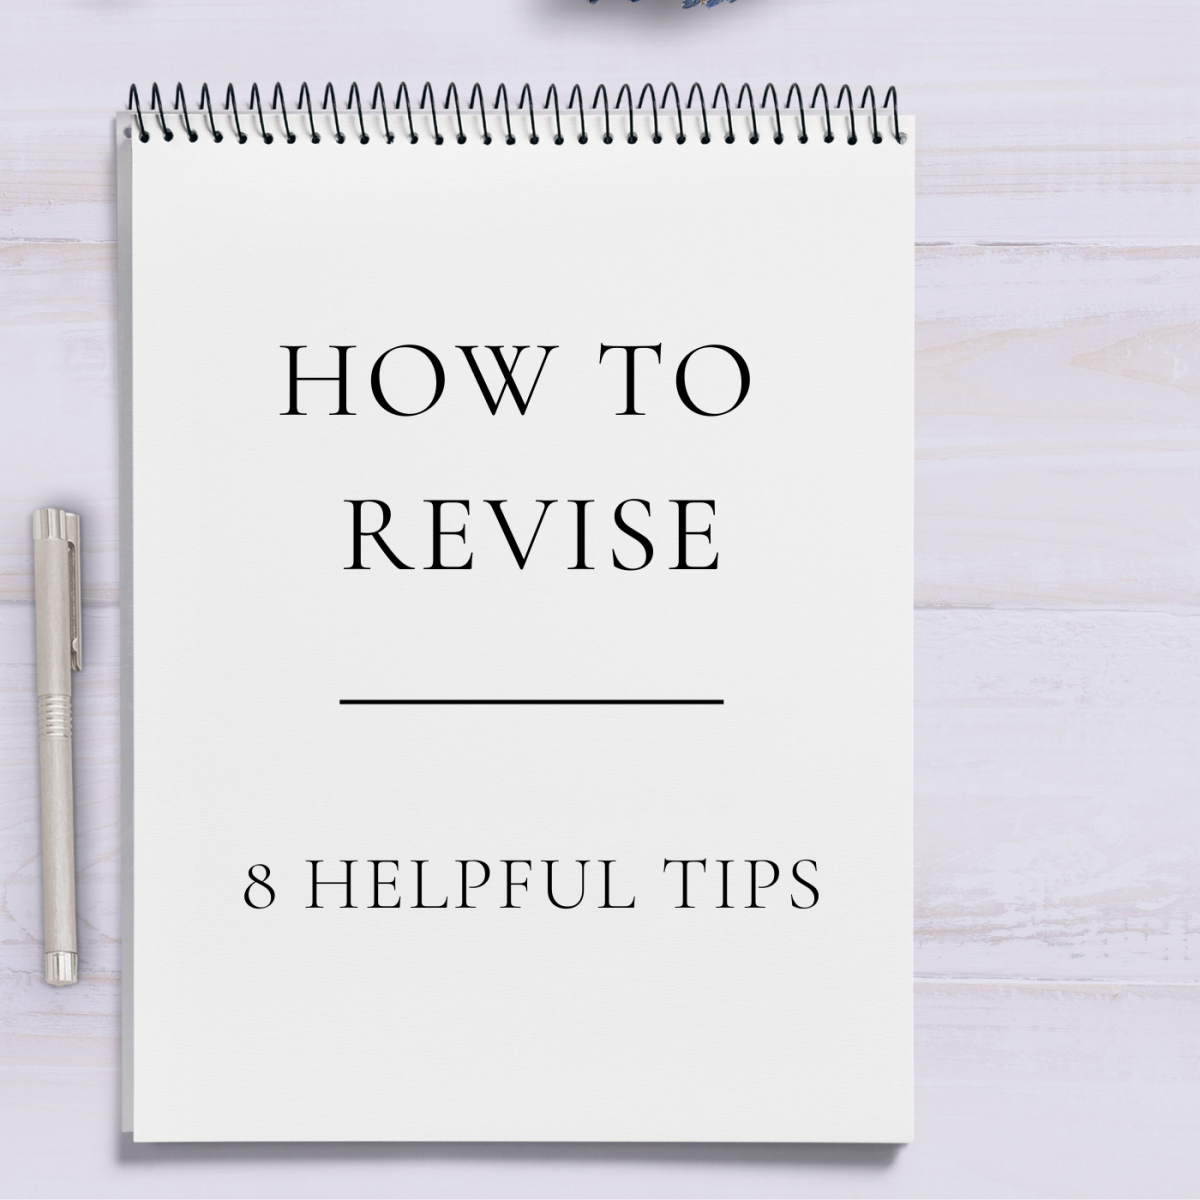 How to Revise: 8 Steps to Make Your Revision Easier